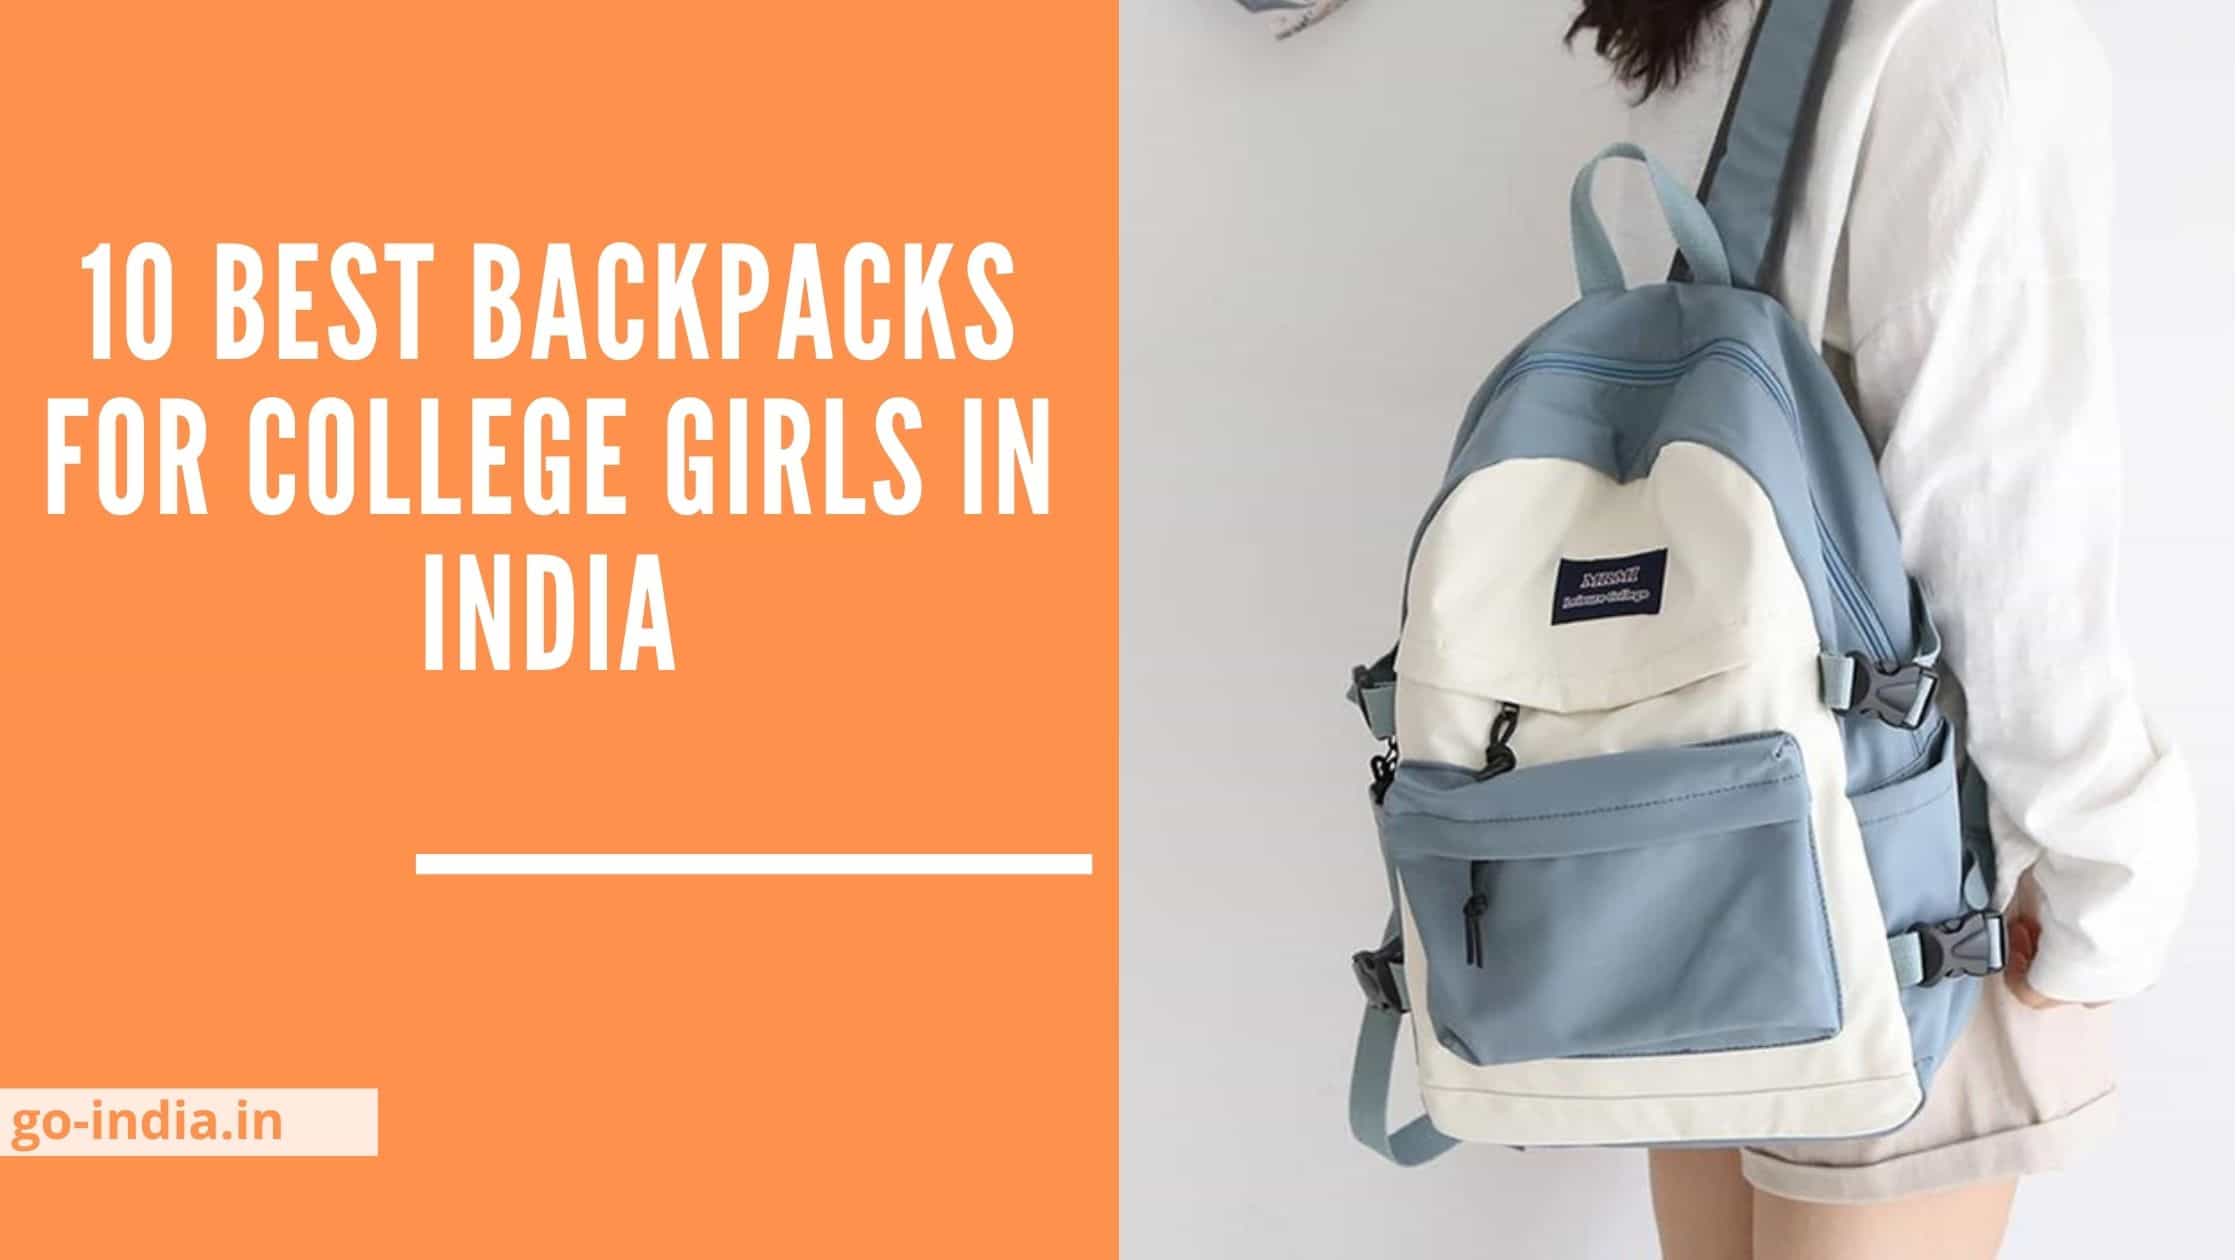 10 Best Backpacks for College Girls in India 2021 – Reviews & Buying Guide